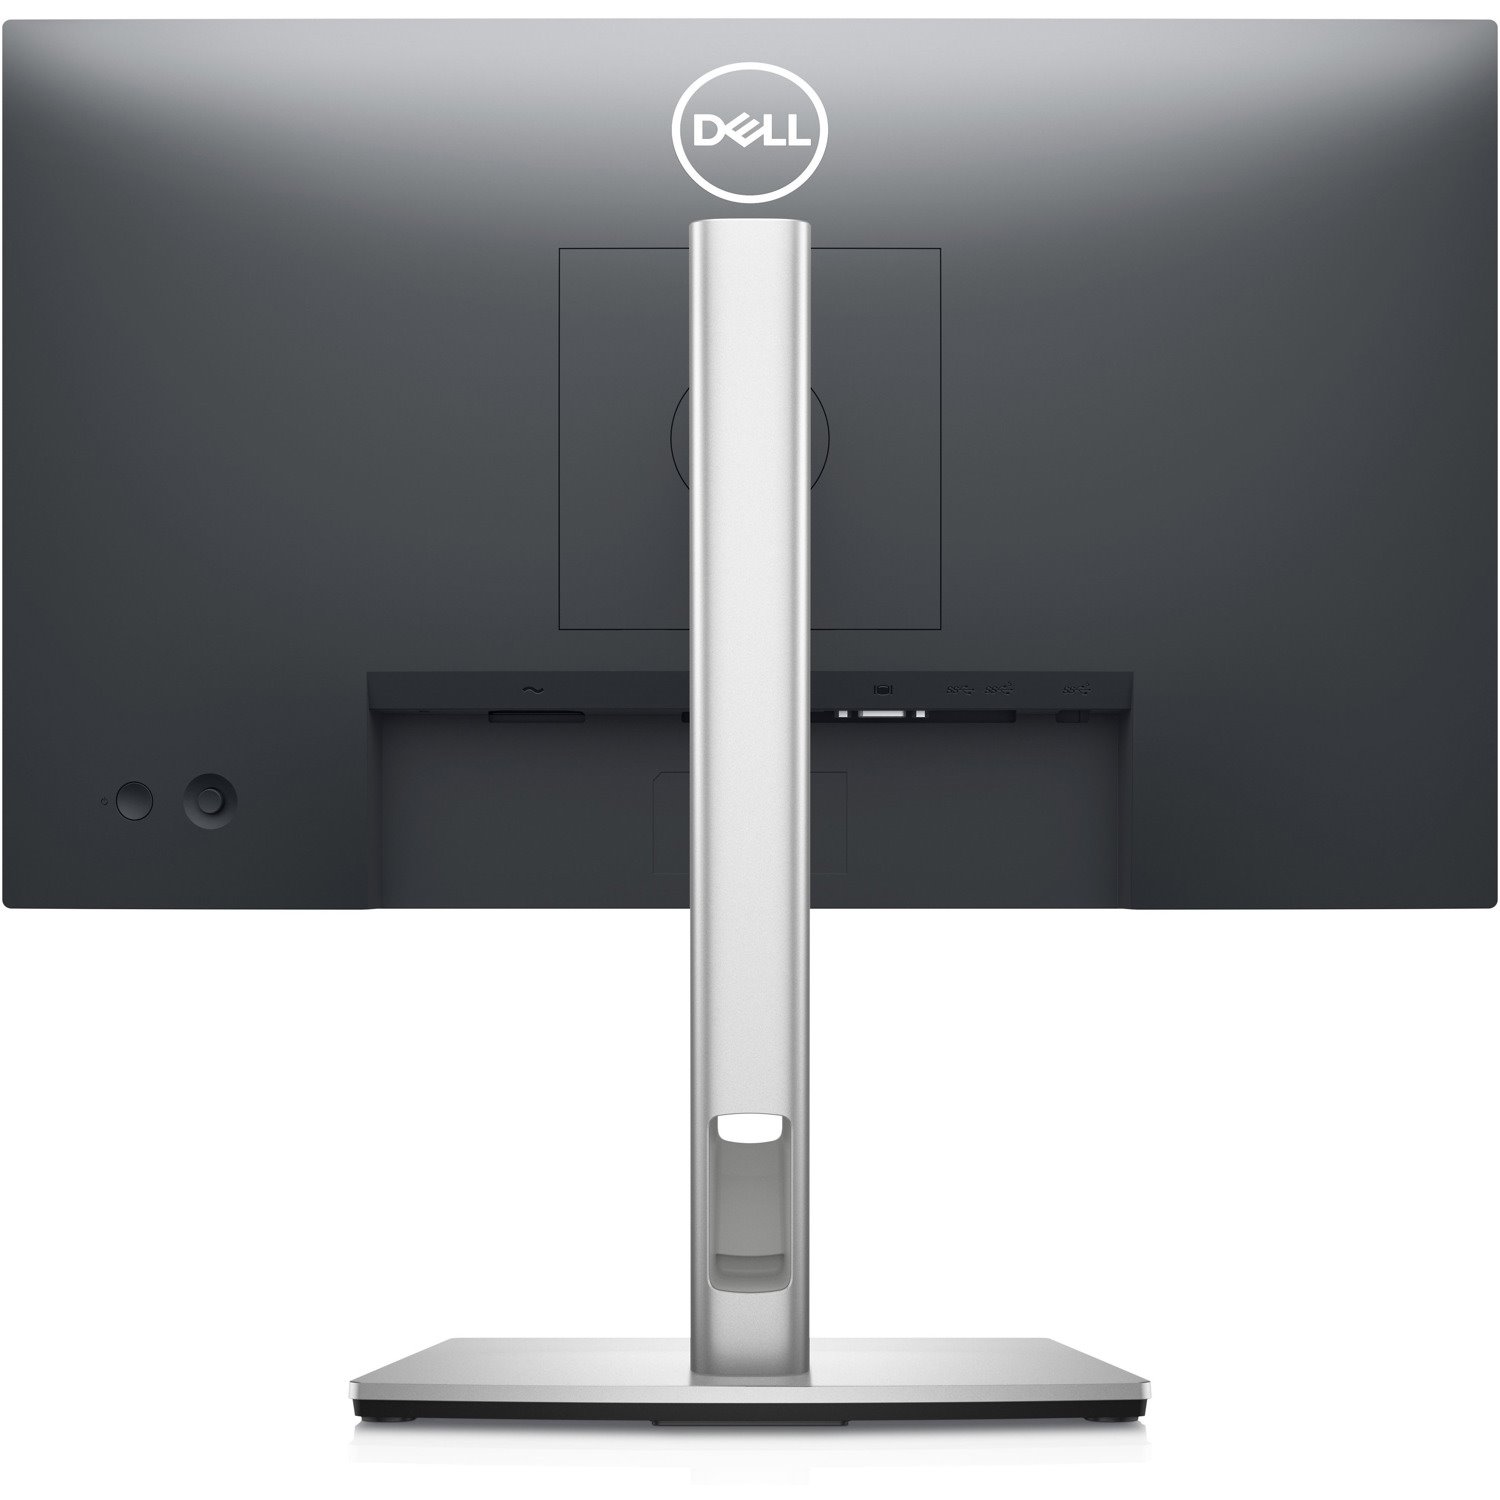 Dell P2222H_WOST 22" Class LCD Monitor